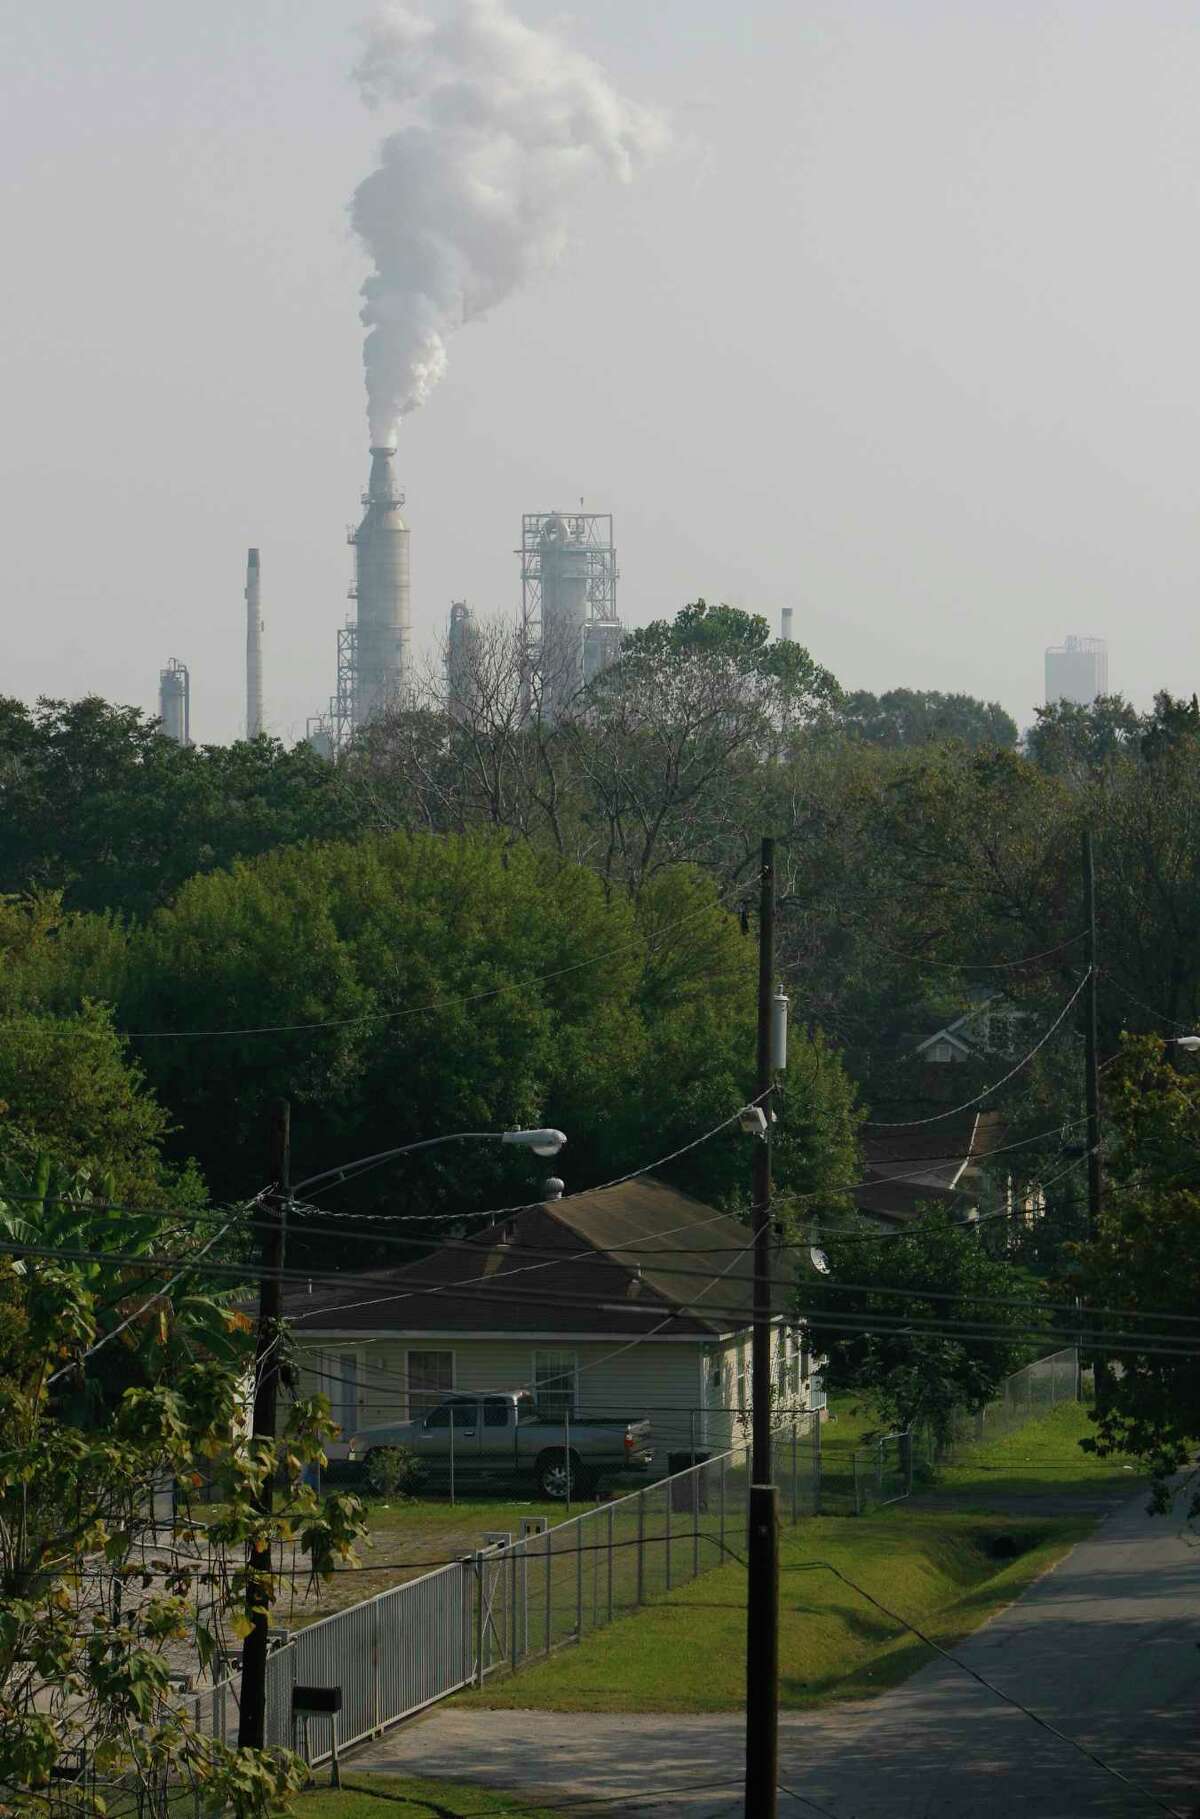 The Manchester neighborhood, next to the Houston Ship Channel and several petrochemical plants, has reported many problems with air pollution. ﻿